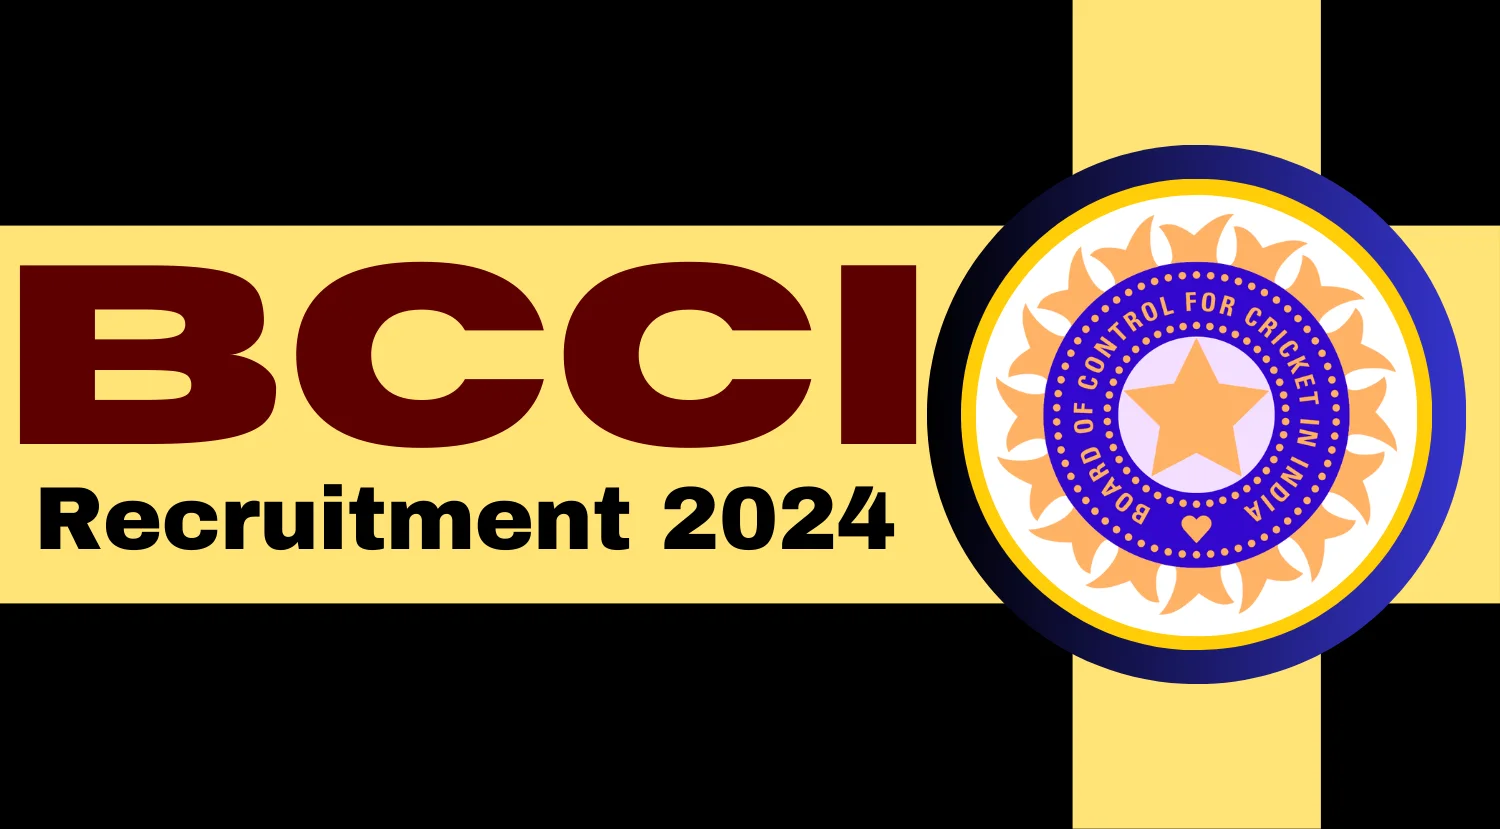 BCCI Recruitment 2024, Opportunity to Work with Indian Men’s Cricket Team, Apply Now